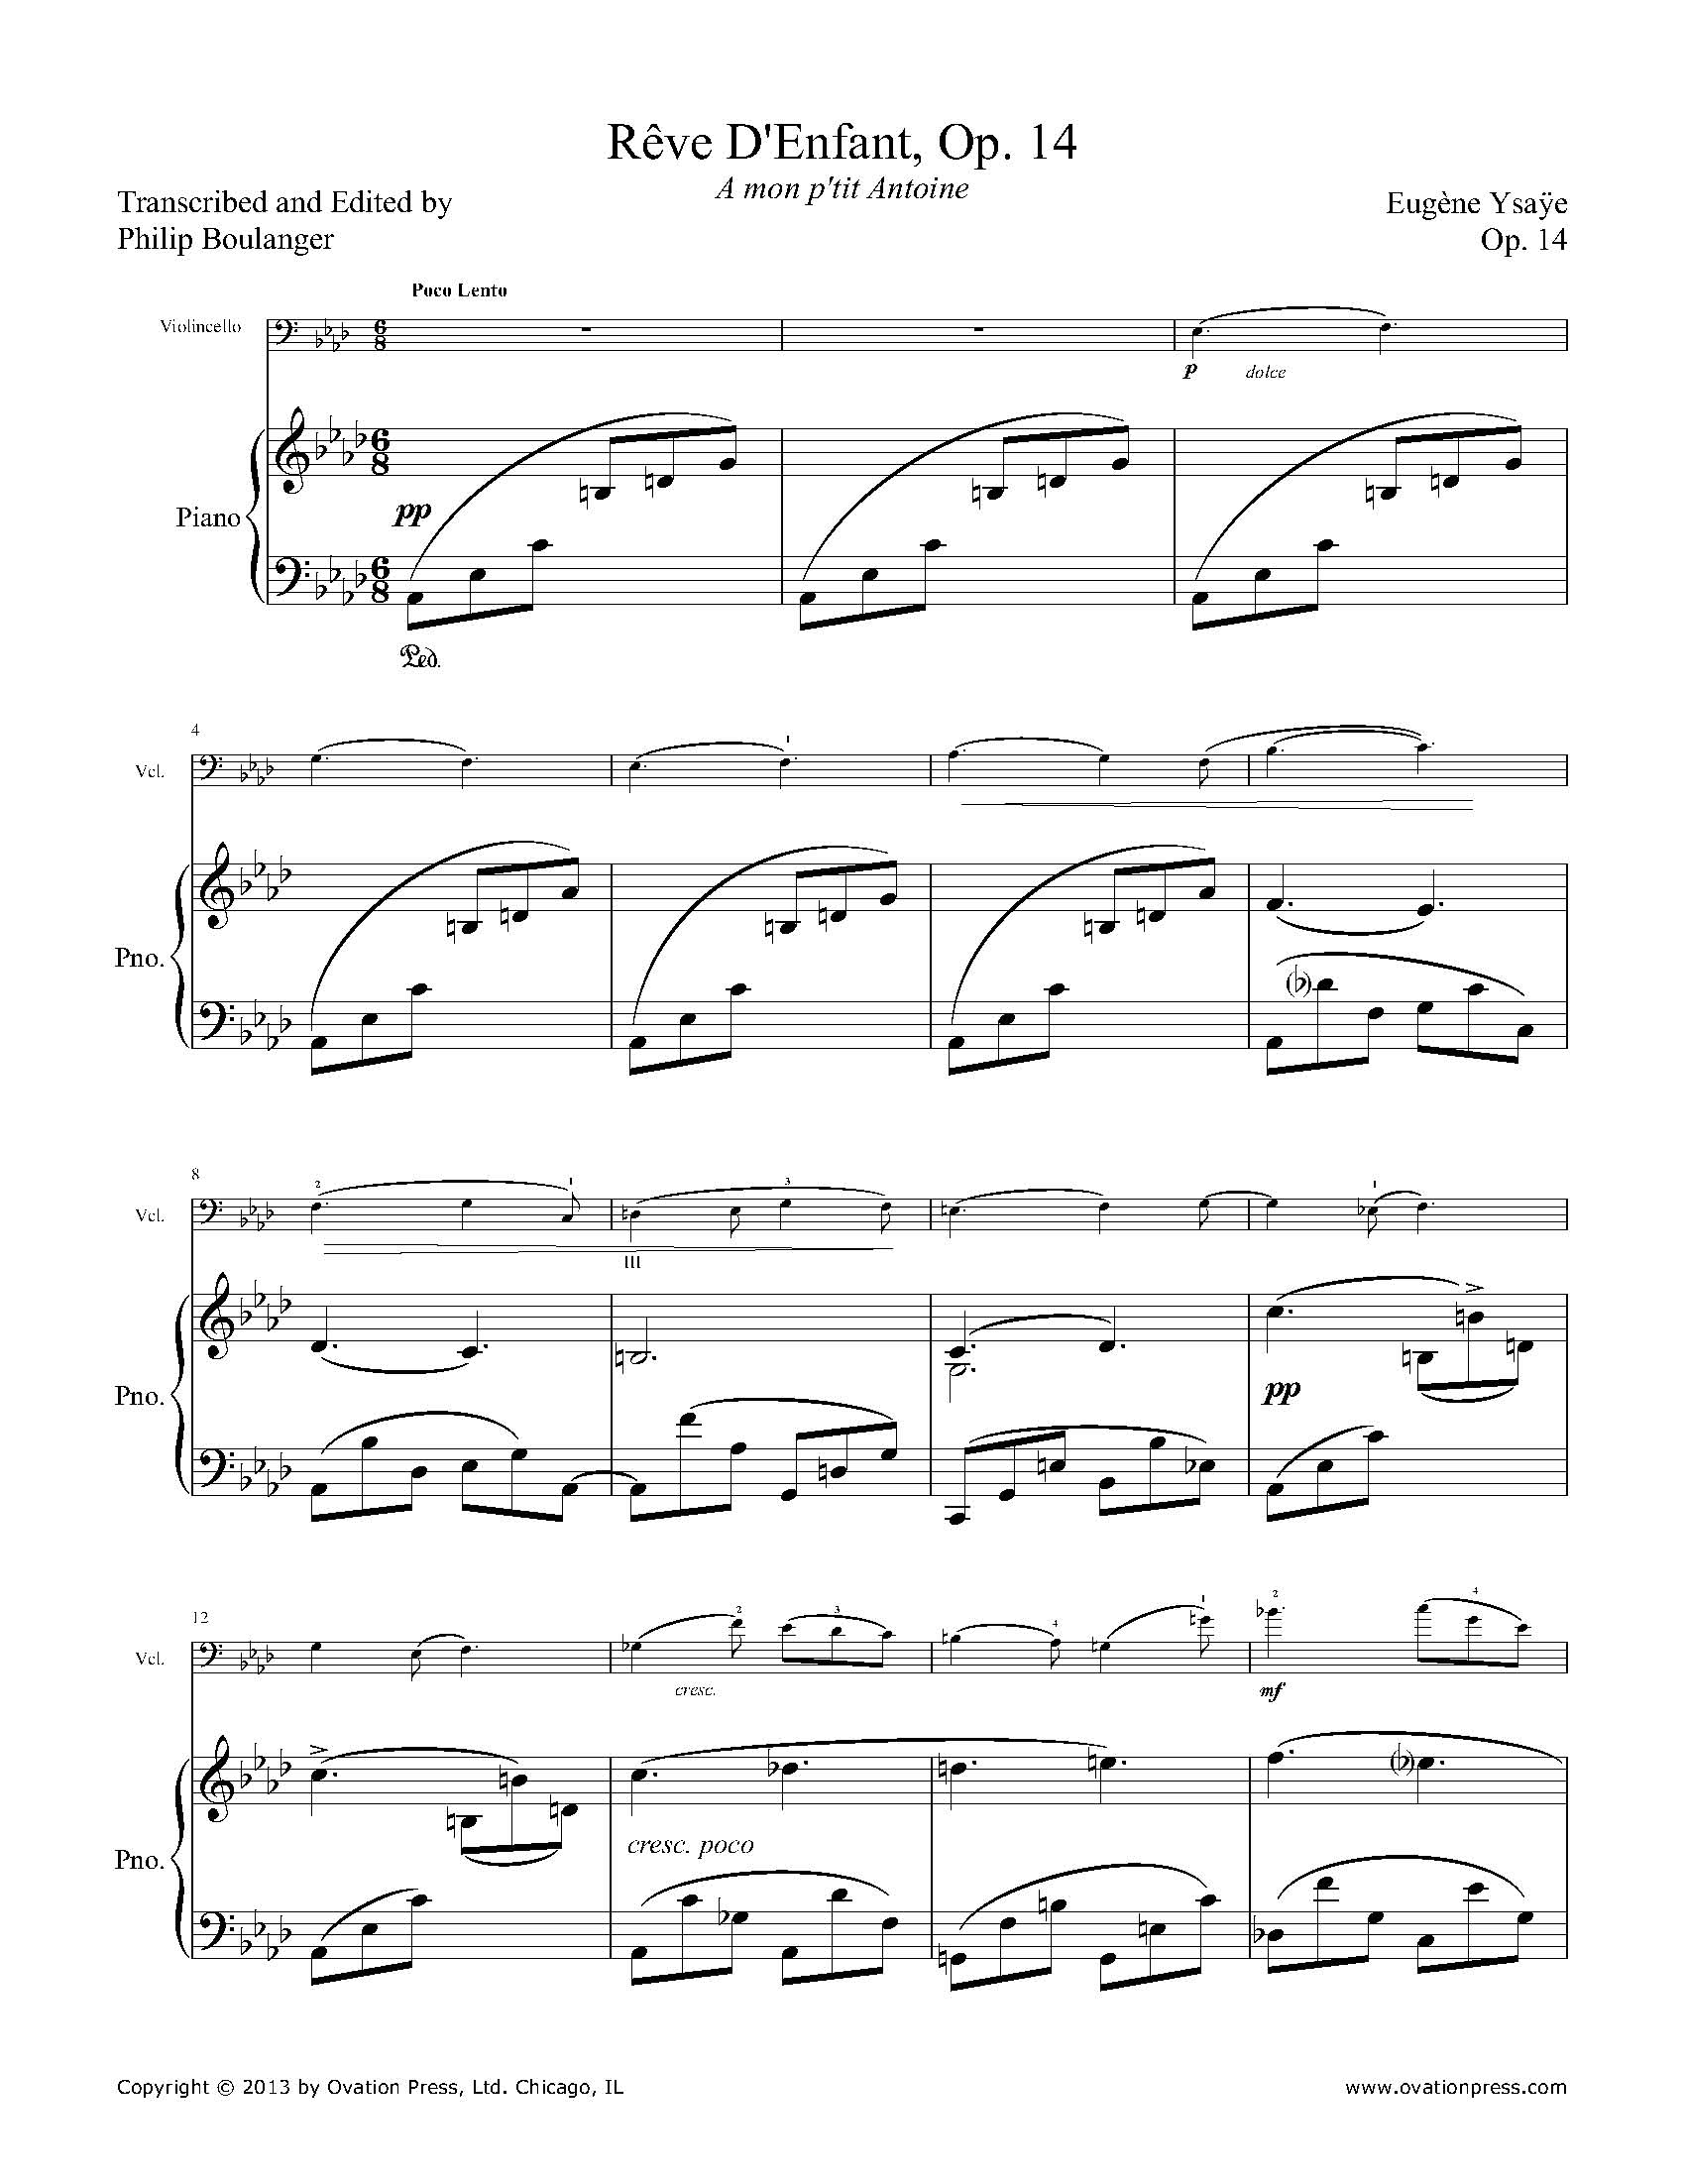 Ysaÿe Rêve D'Enfant Transcribed for Cello and Piano